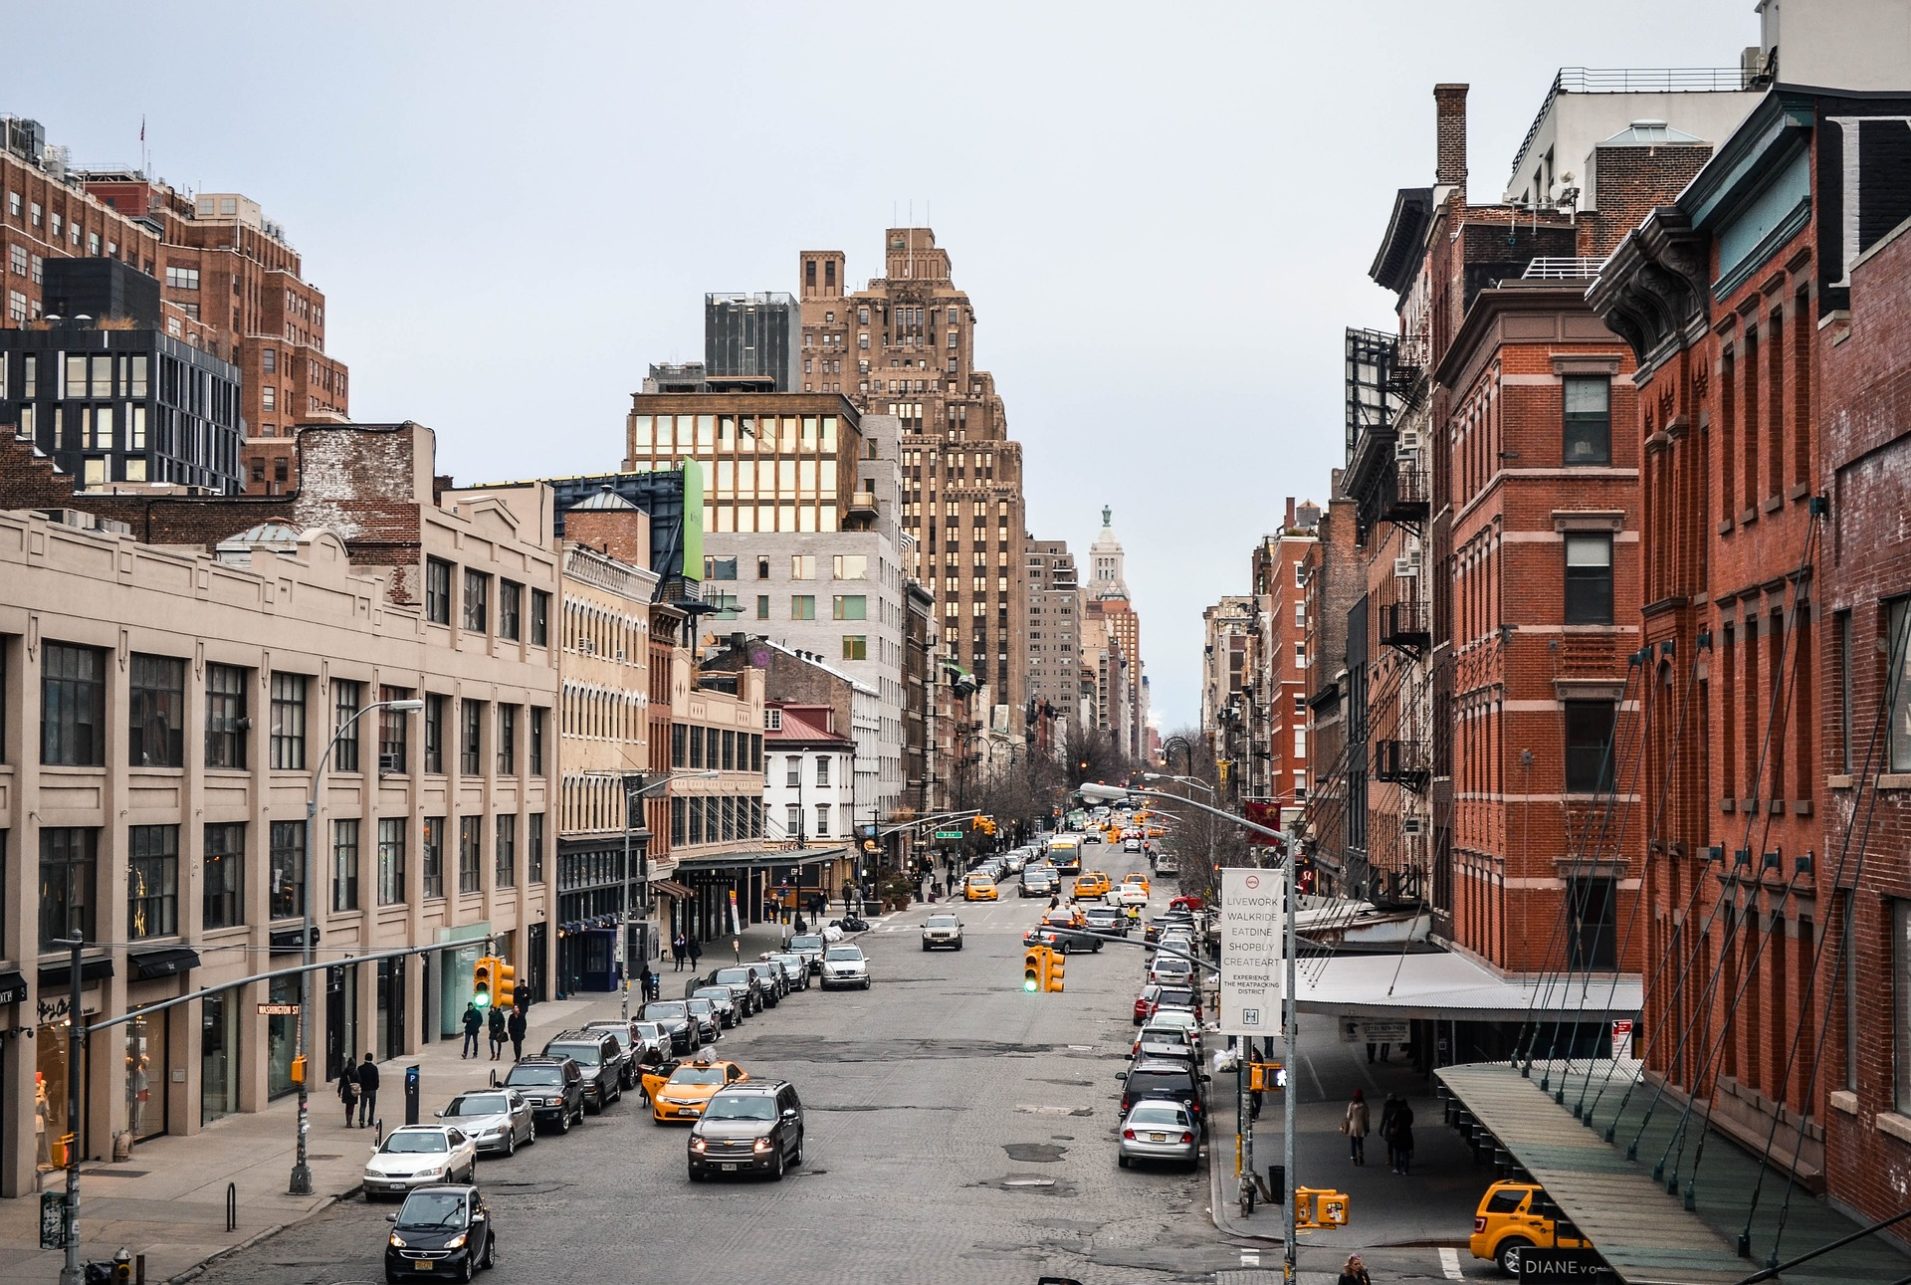 Meatpacking District in New York City, USA.